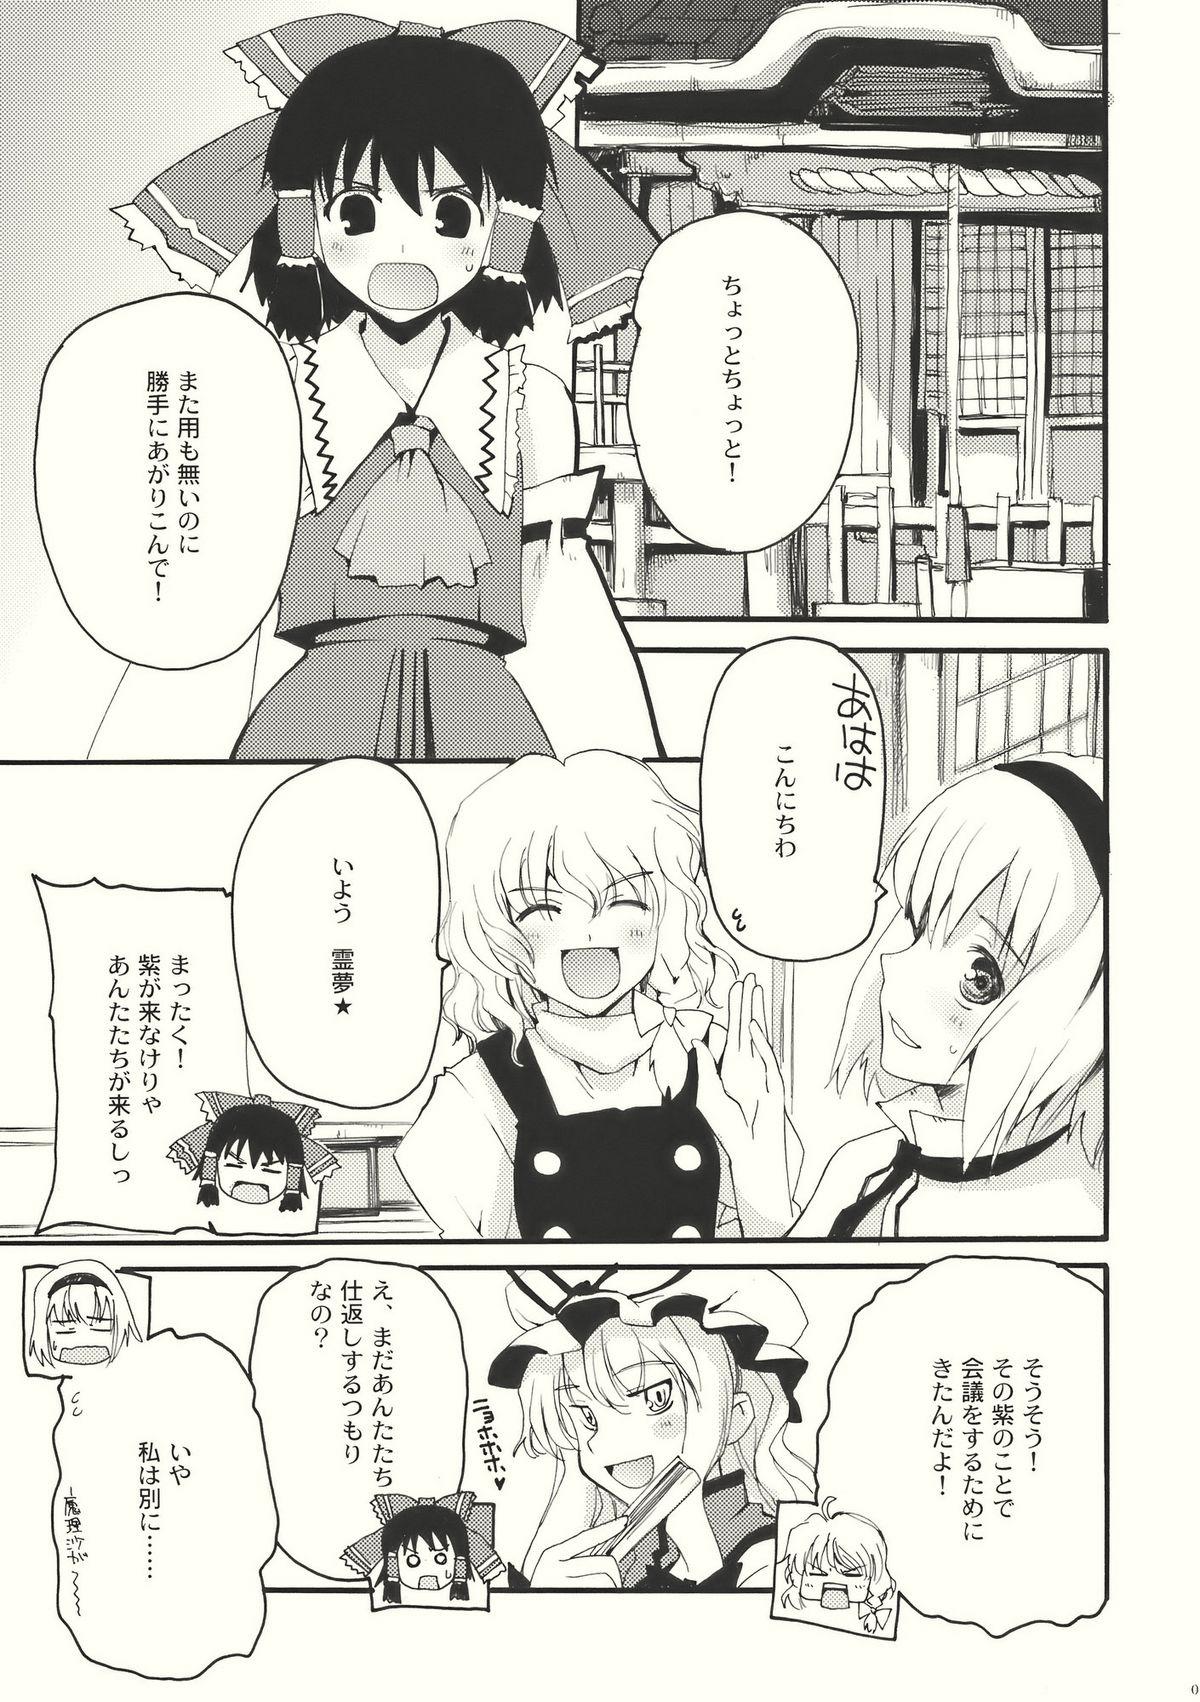 Rope Let Me Take You Home Tonight! 2 - Touhou project Thot - Page 5